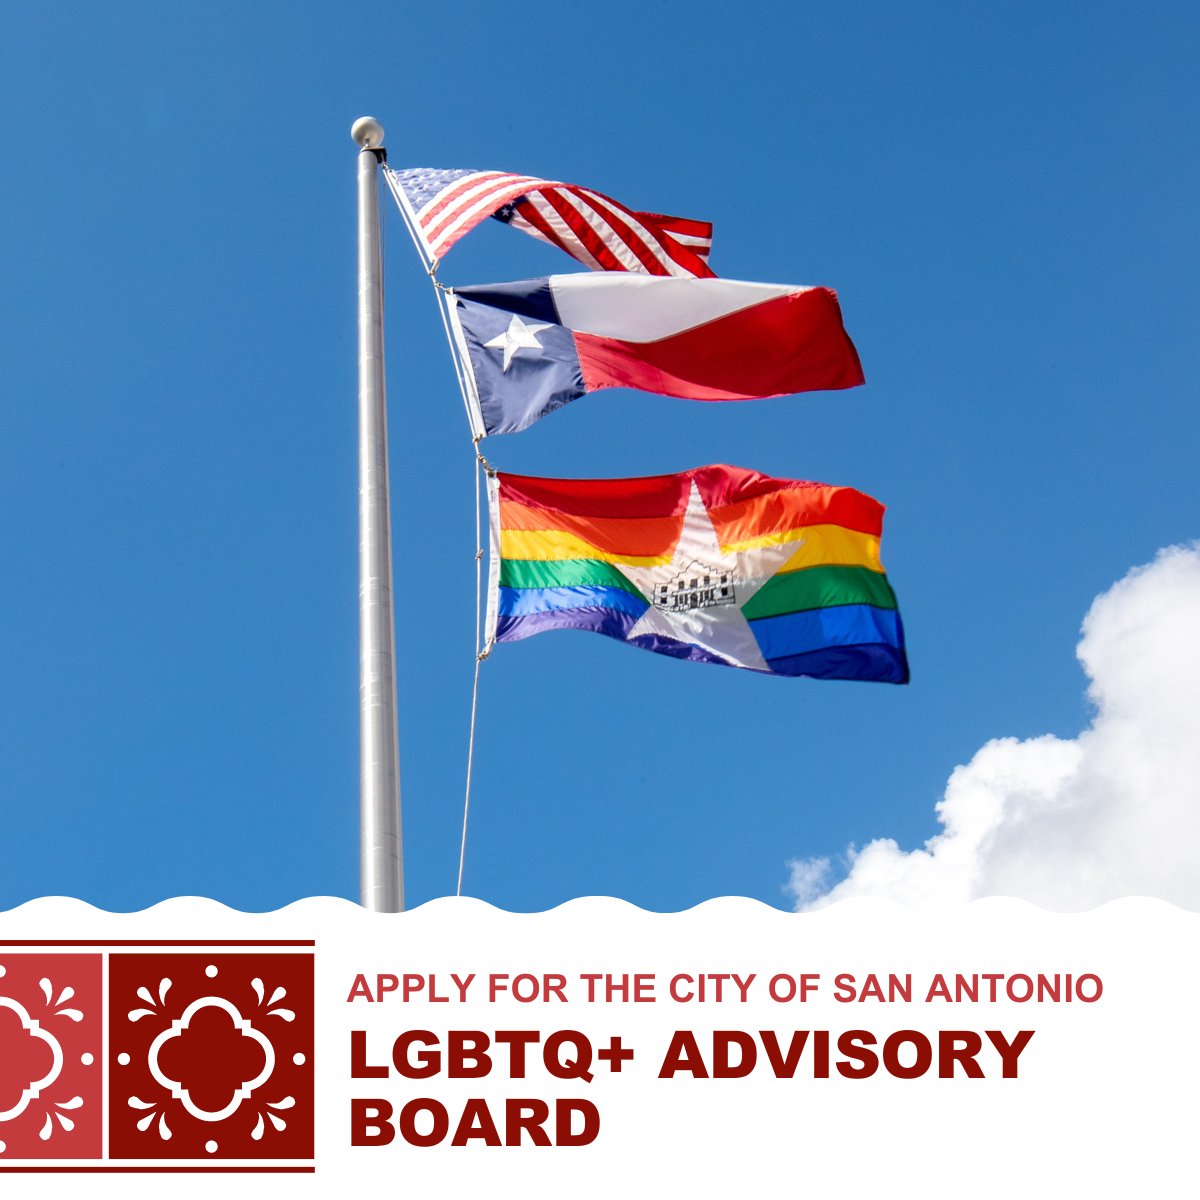 If you're ready to shape a more inclusive San Antonio, applications to join the LGBTQ+ Advisory Board are open. 

The Board was created to guide initiatives that enhance the quality of life for all members of the LGBTQIA+ community. 

Apply now at: bit.ly/44kwjzD